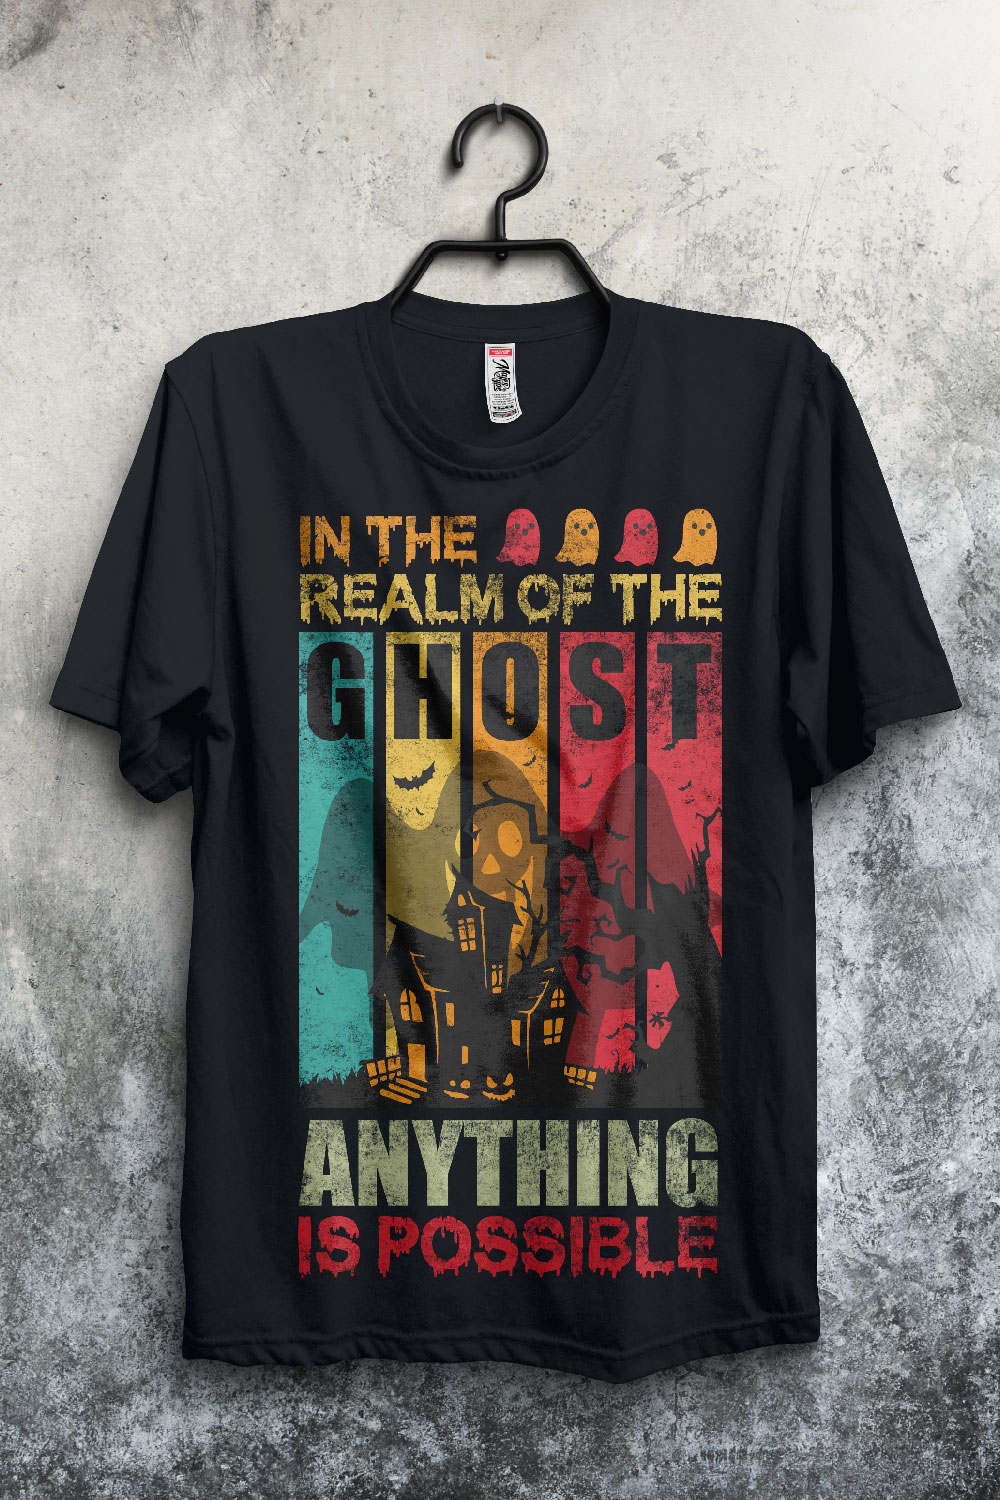 Ghost t shirt design pinterest preview image.